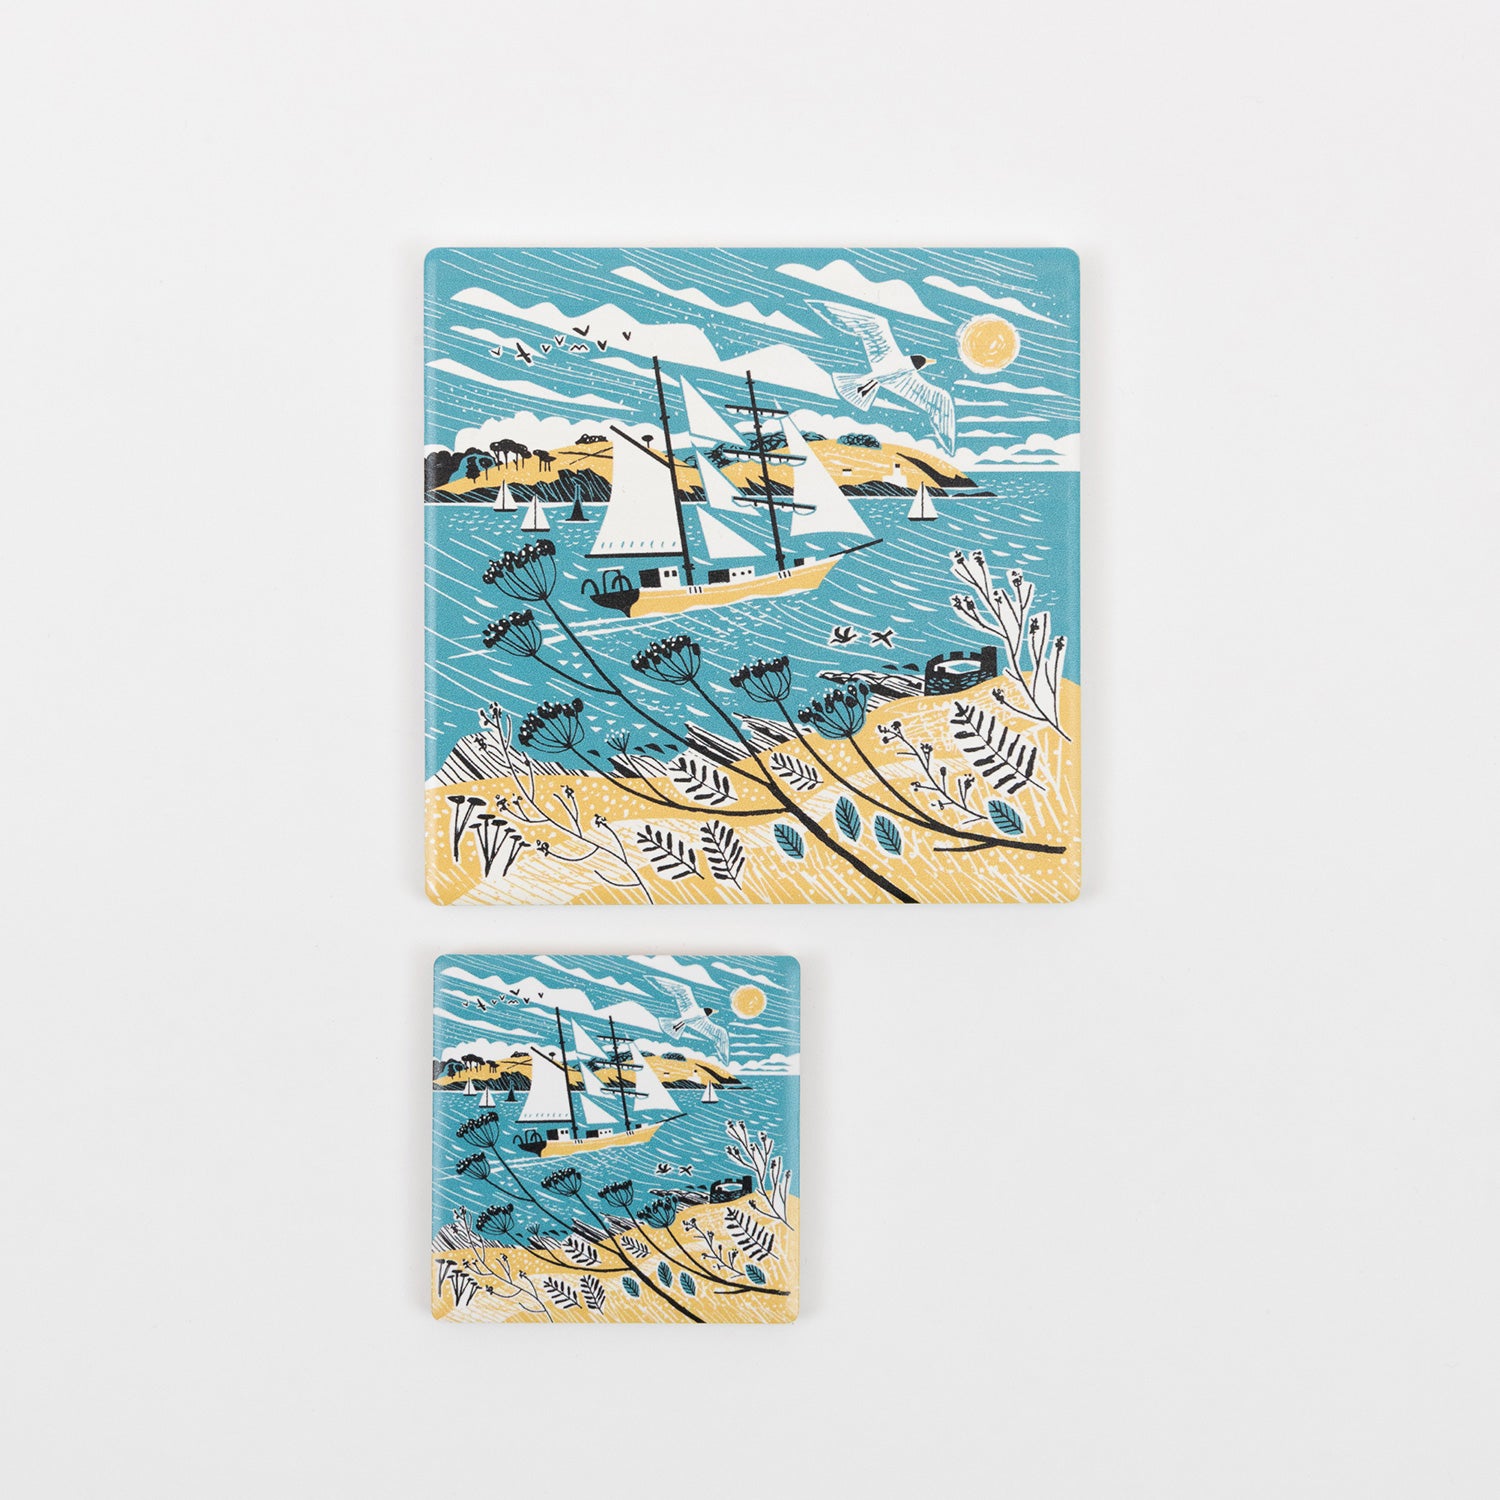 Falmouth Tall Ships Magnet in a blue, yellow and white design featuring a tall ship in full sail. The smaller magnet sits alongside the Falmouth Tall Ships Coaster.